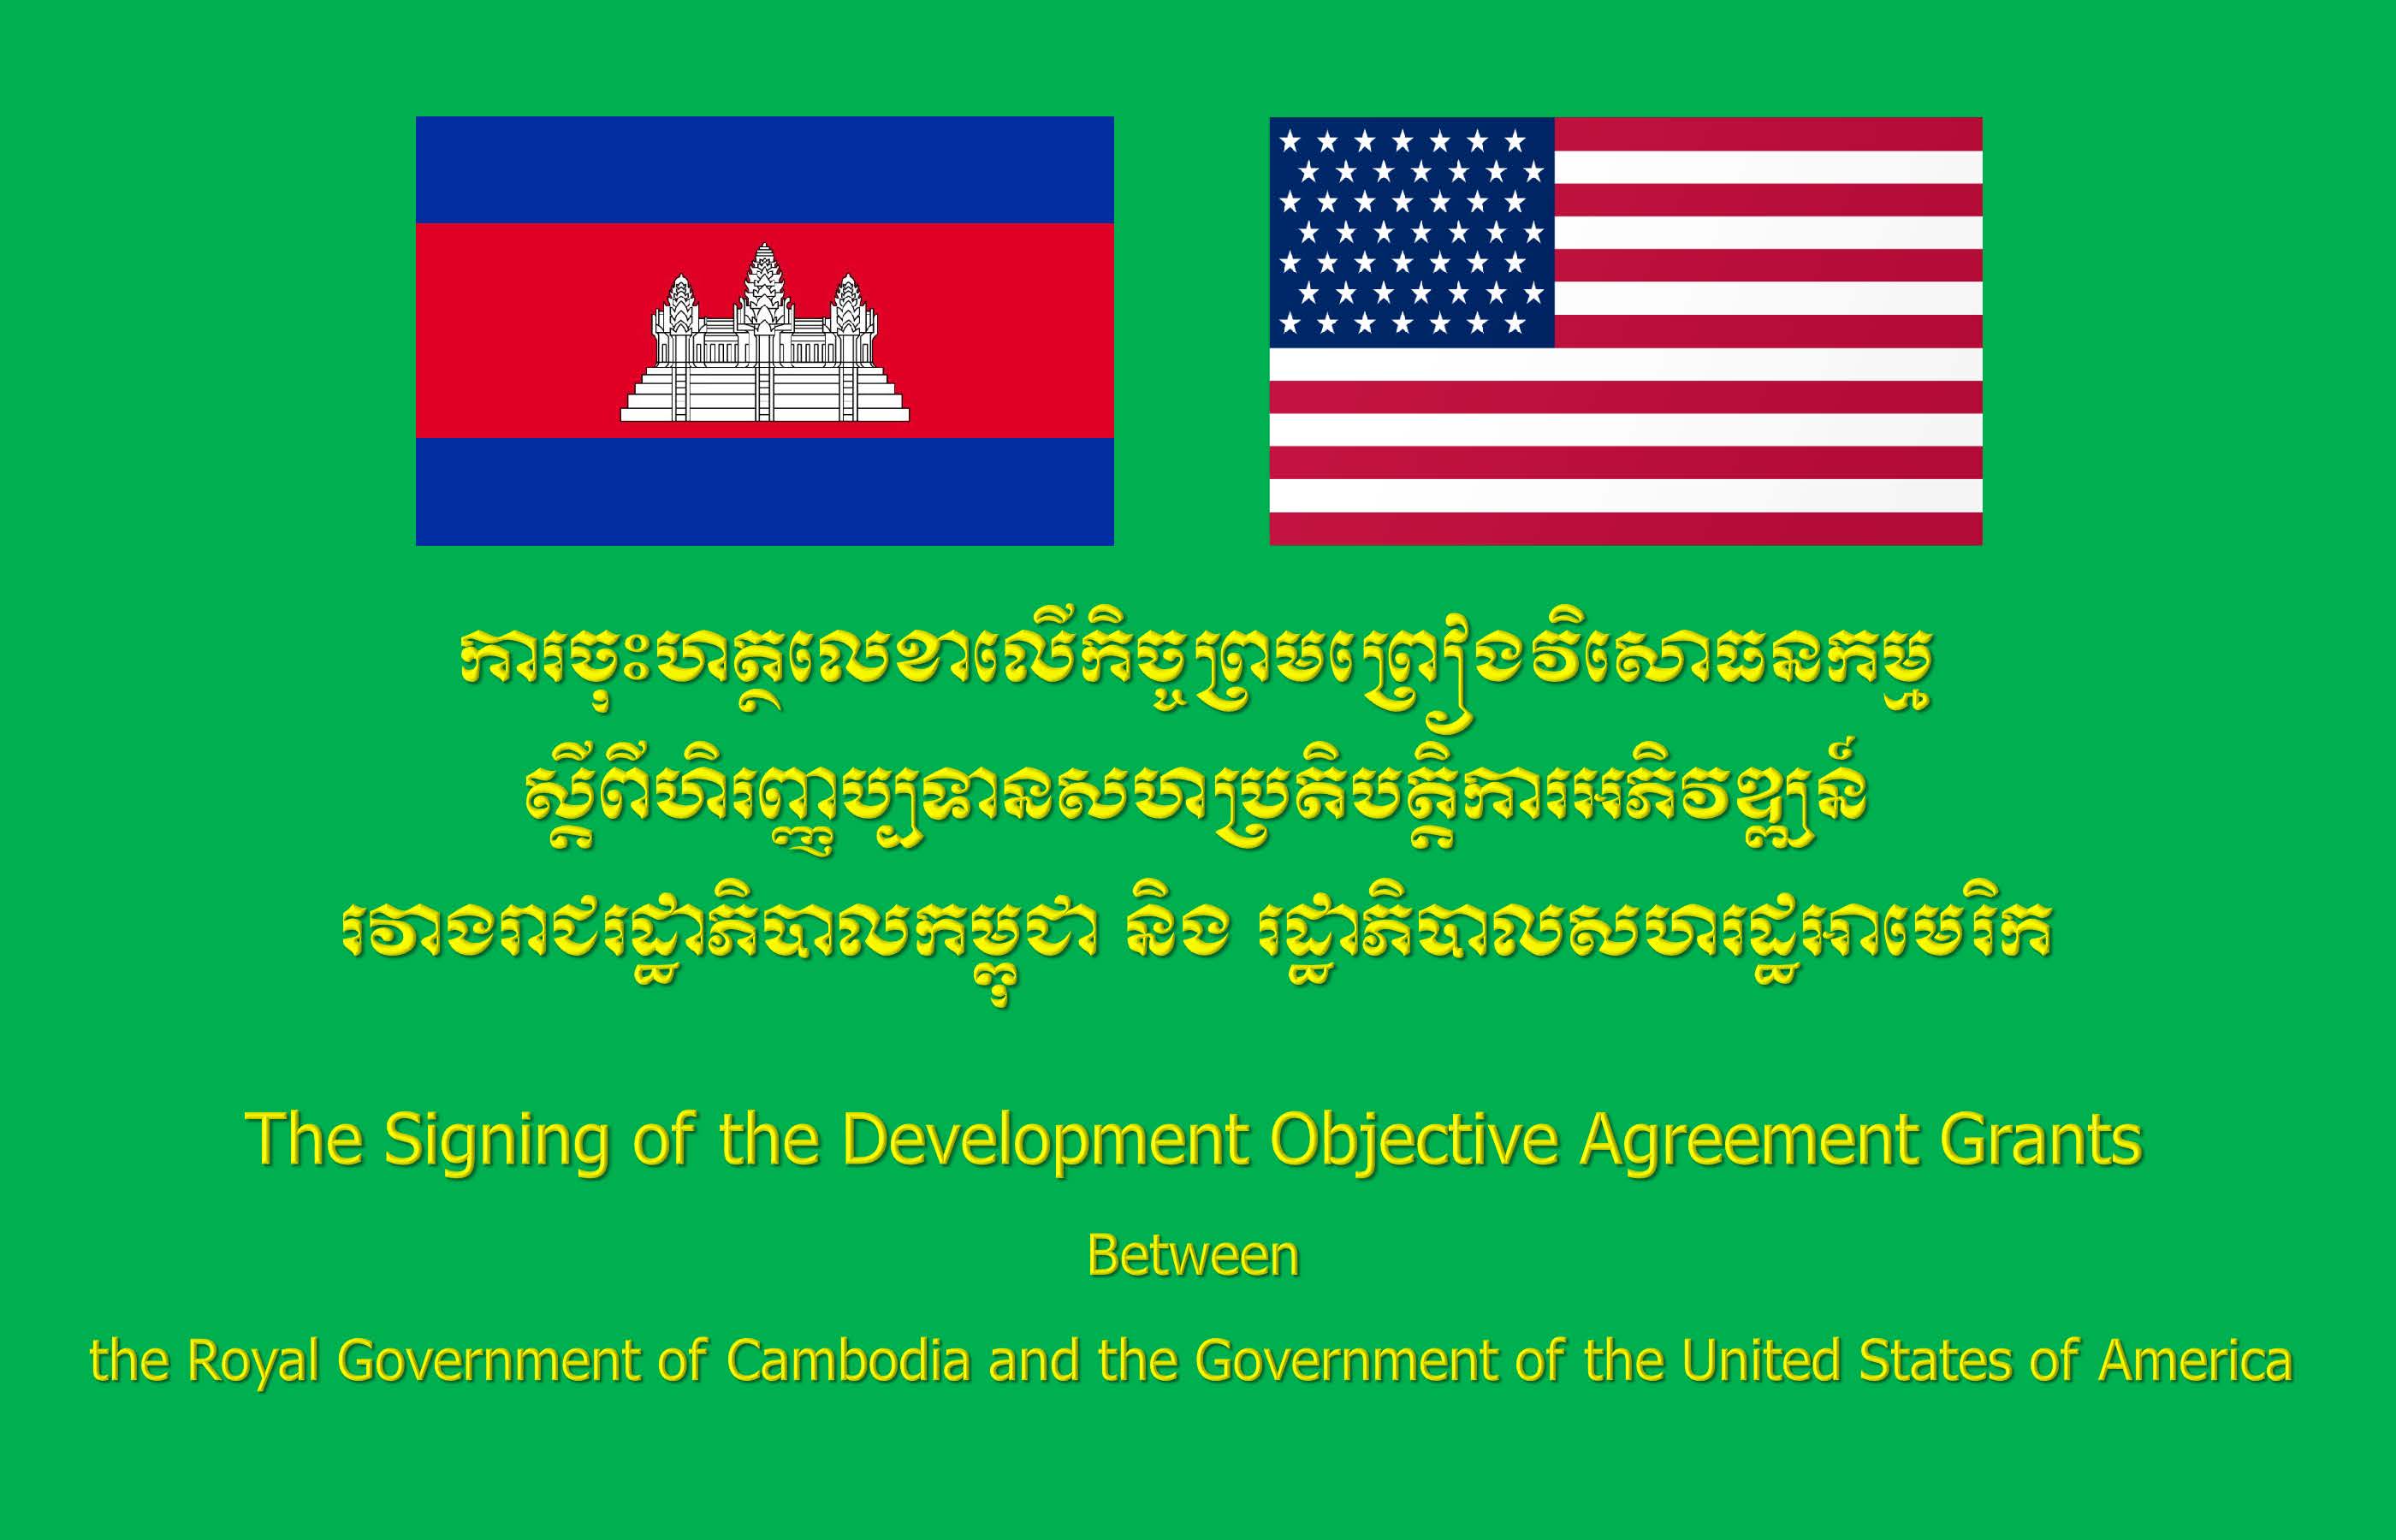 On the Signing of the 2020 Development Objective Agreement Grants  between  the Royal Government of Cambodia and the Government of the United States of America 